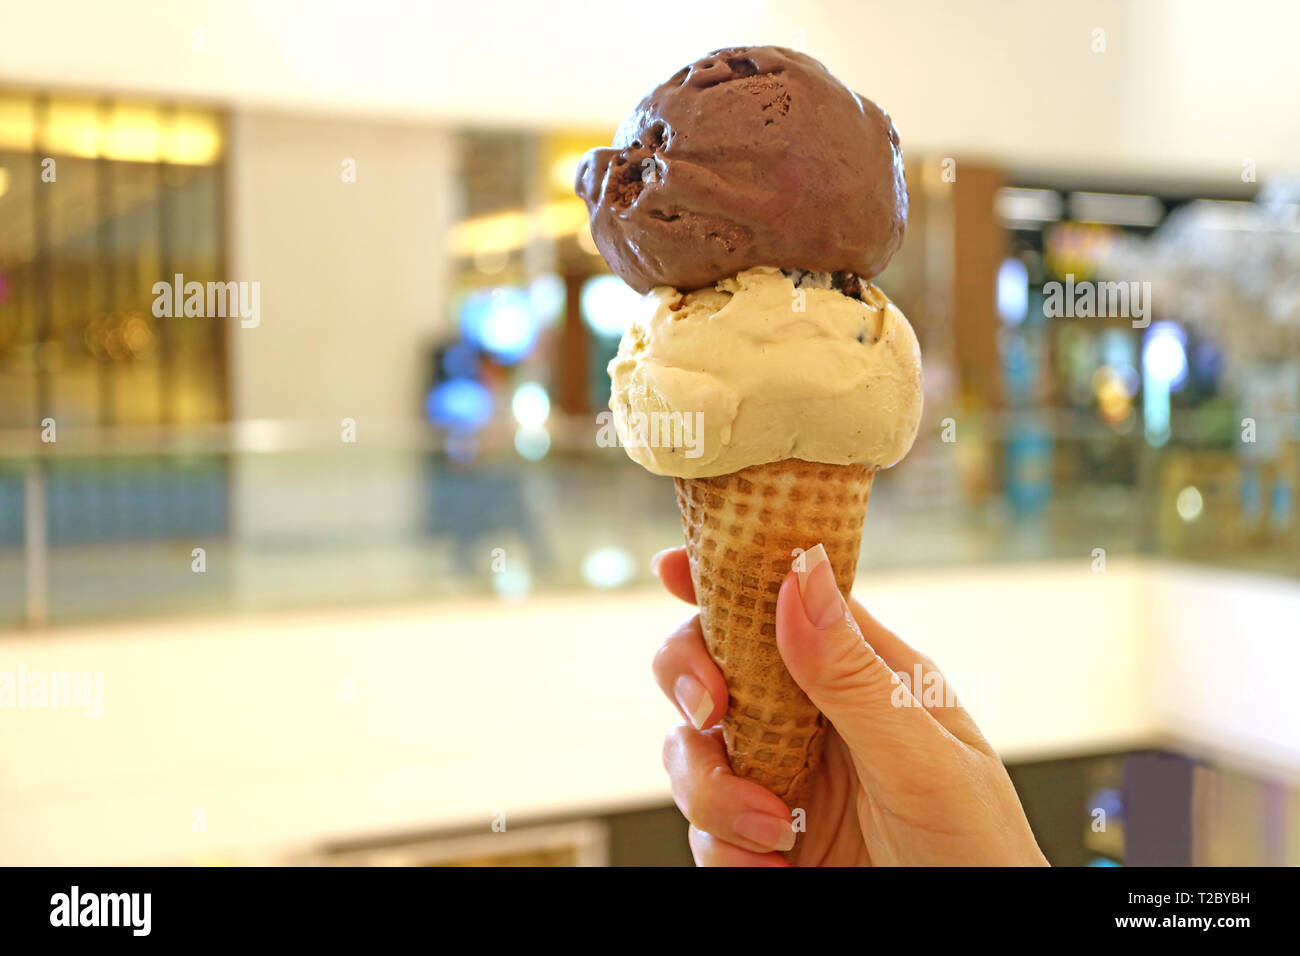 Two scoops of peanut butter and chocolate ice cream cone in woman's hand Stock Photo